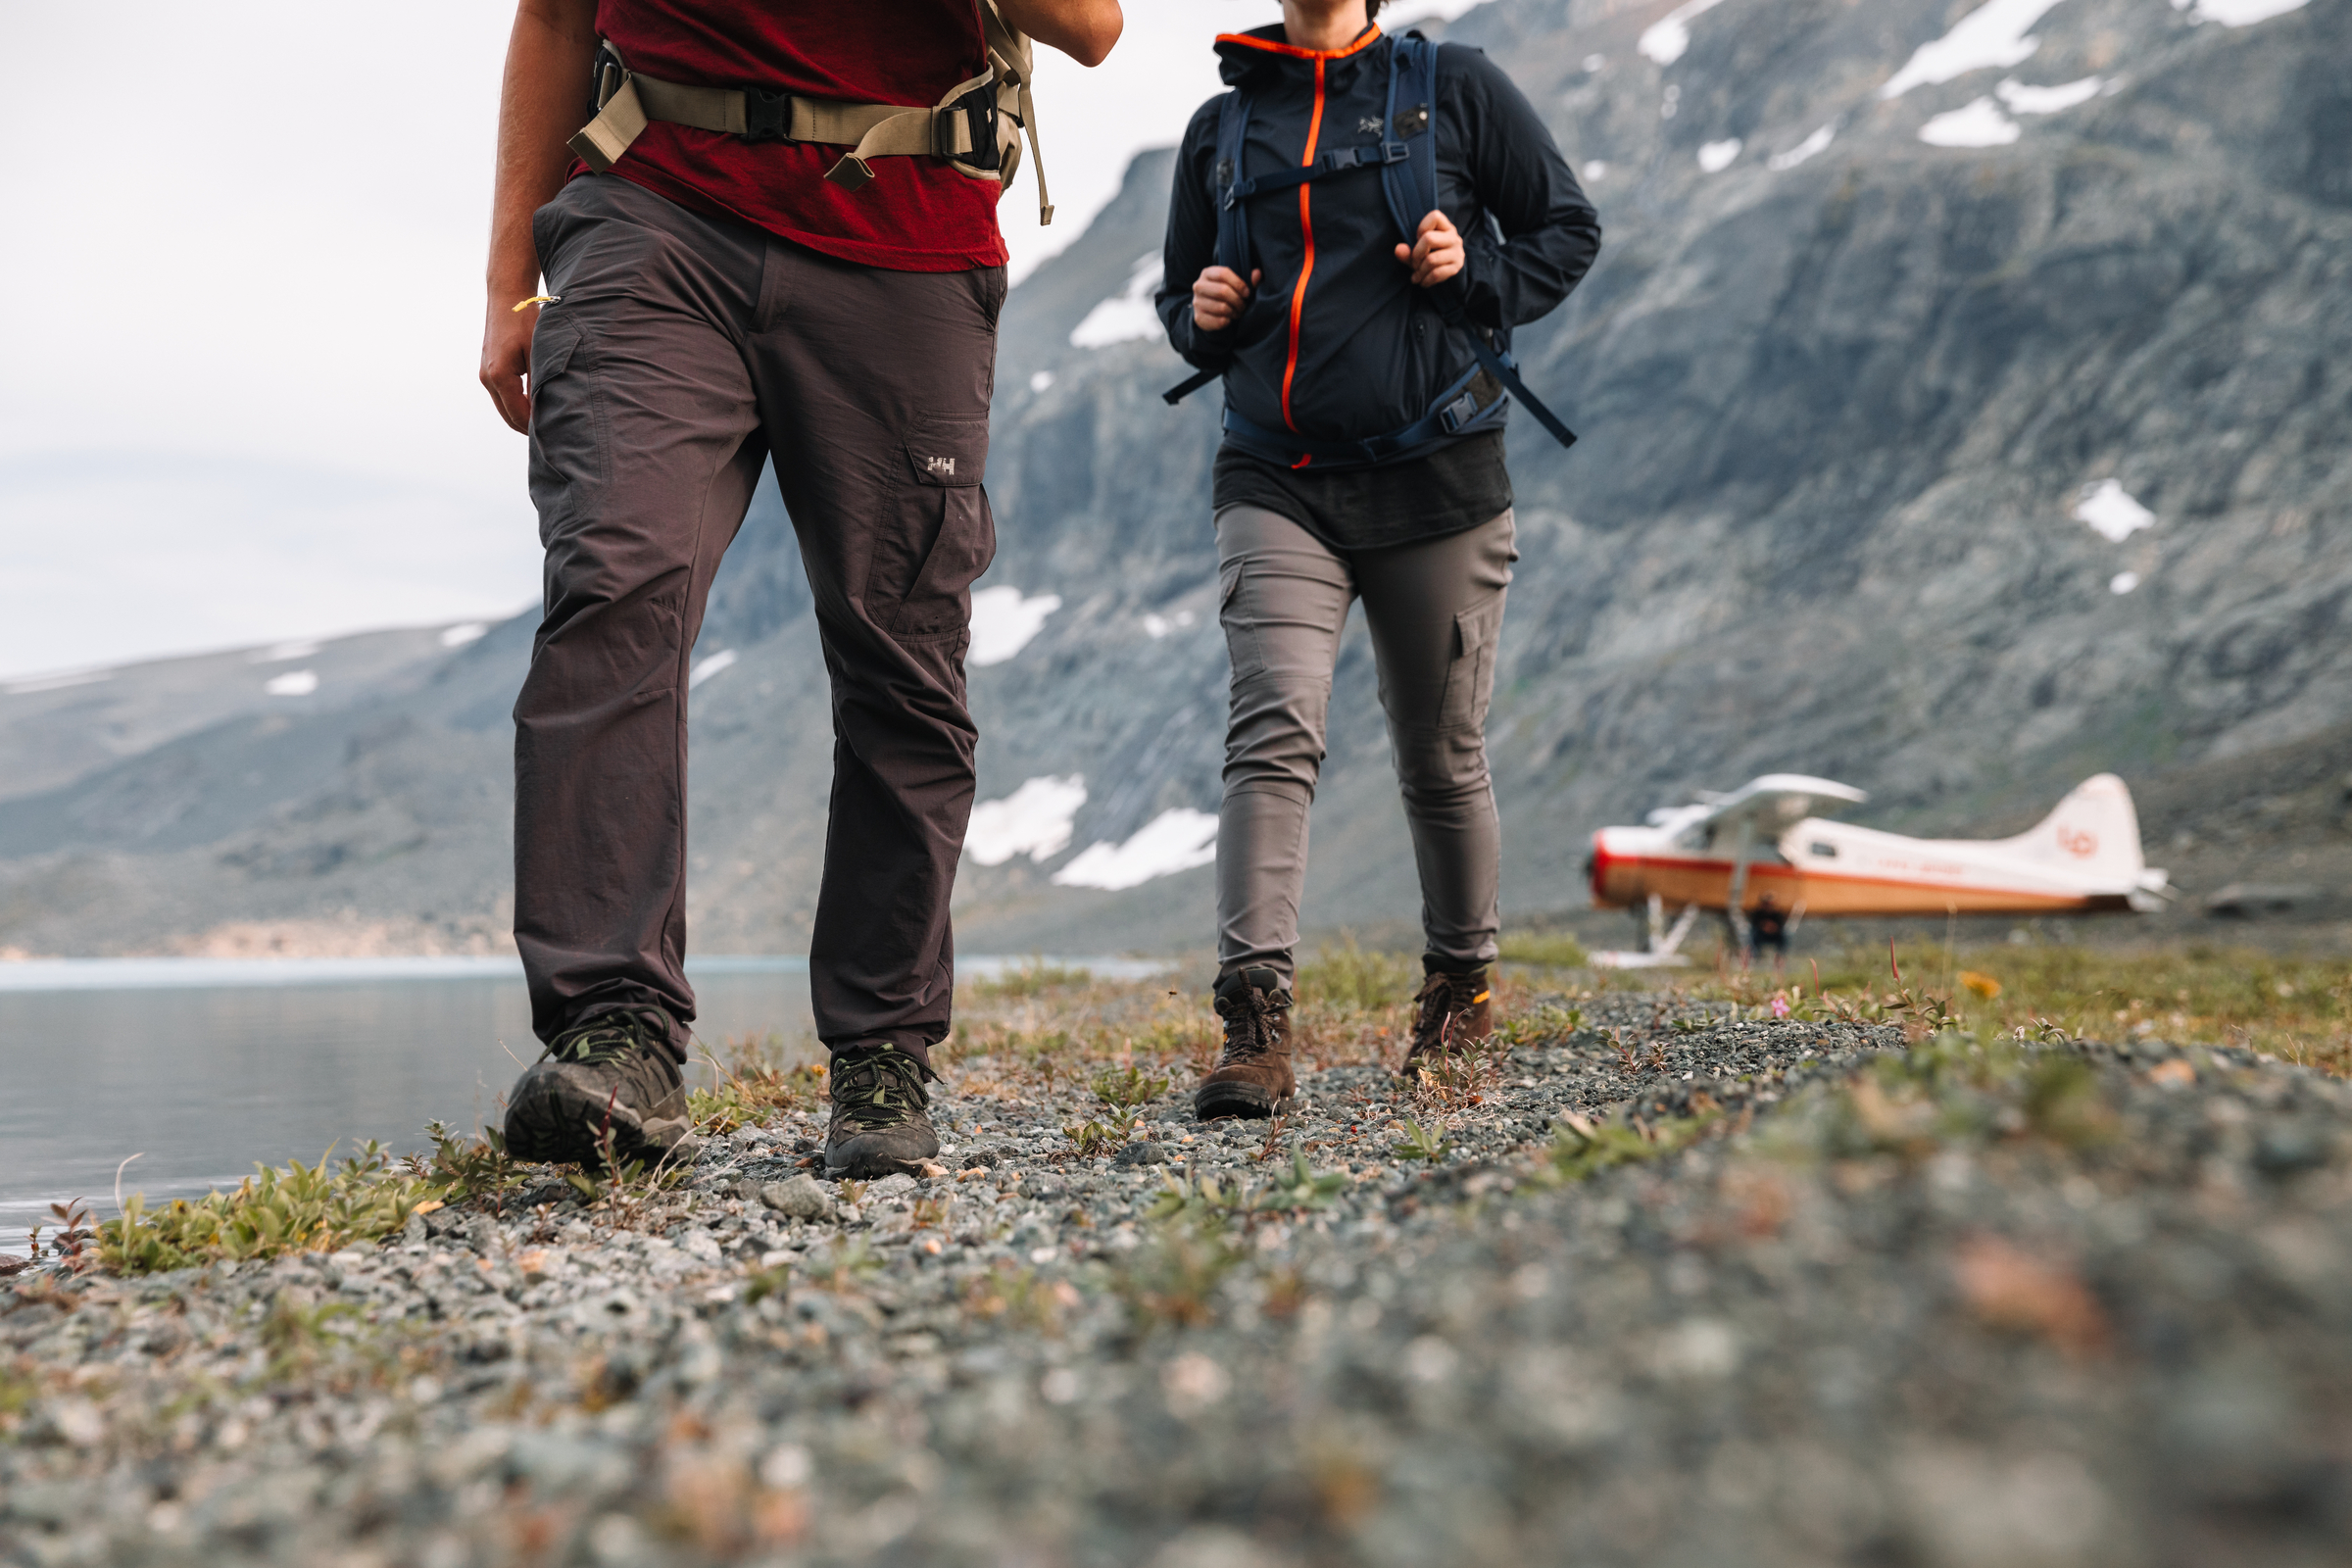 Two people walk on a lakeside trail with towering mountains and a float plane in the background.